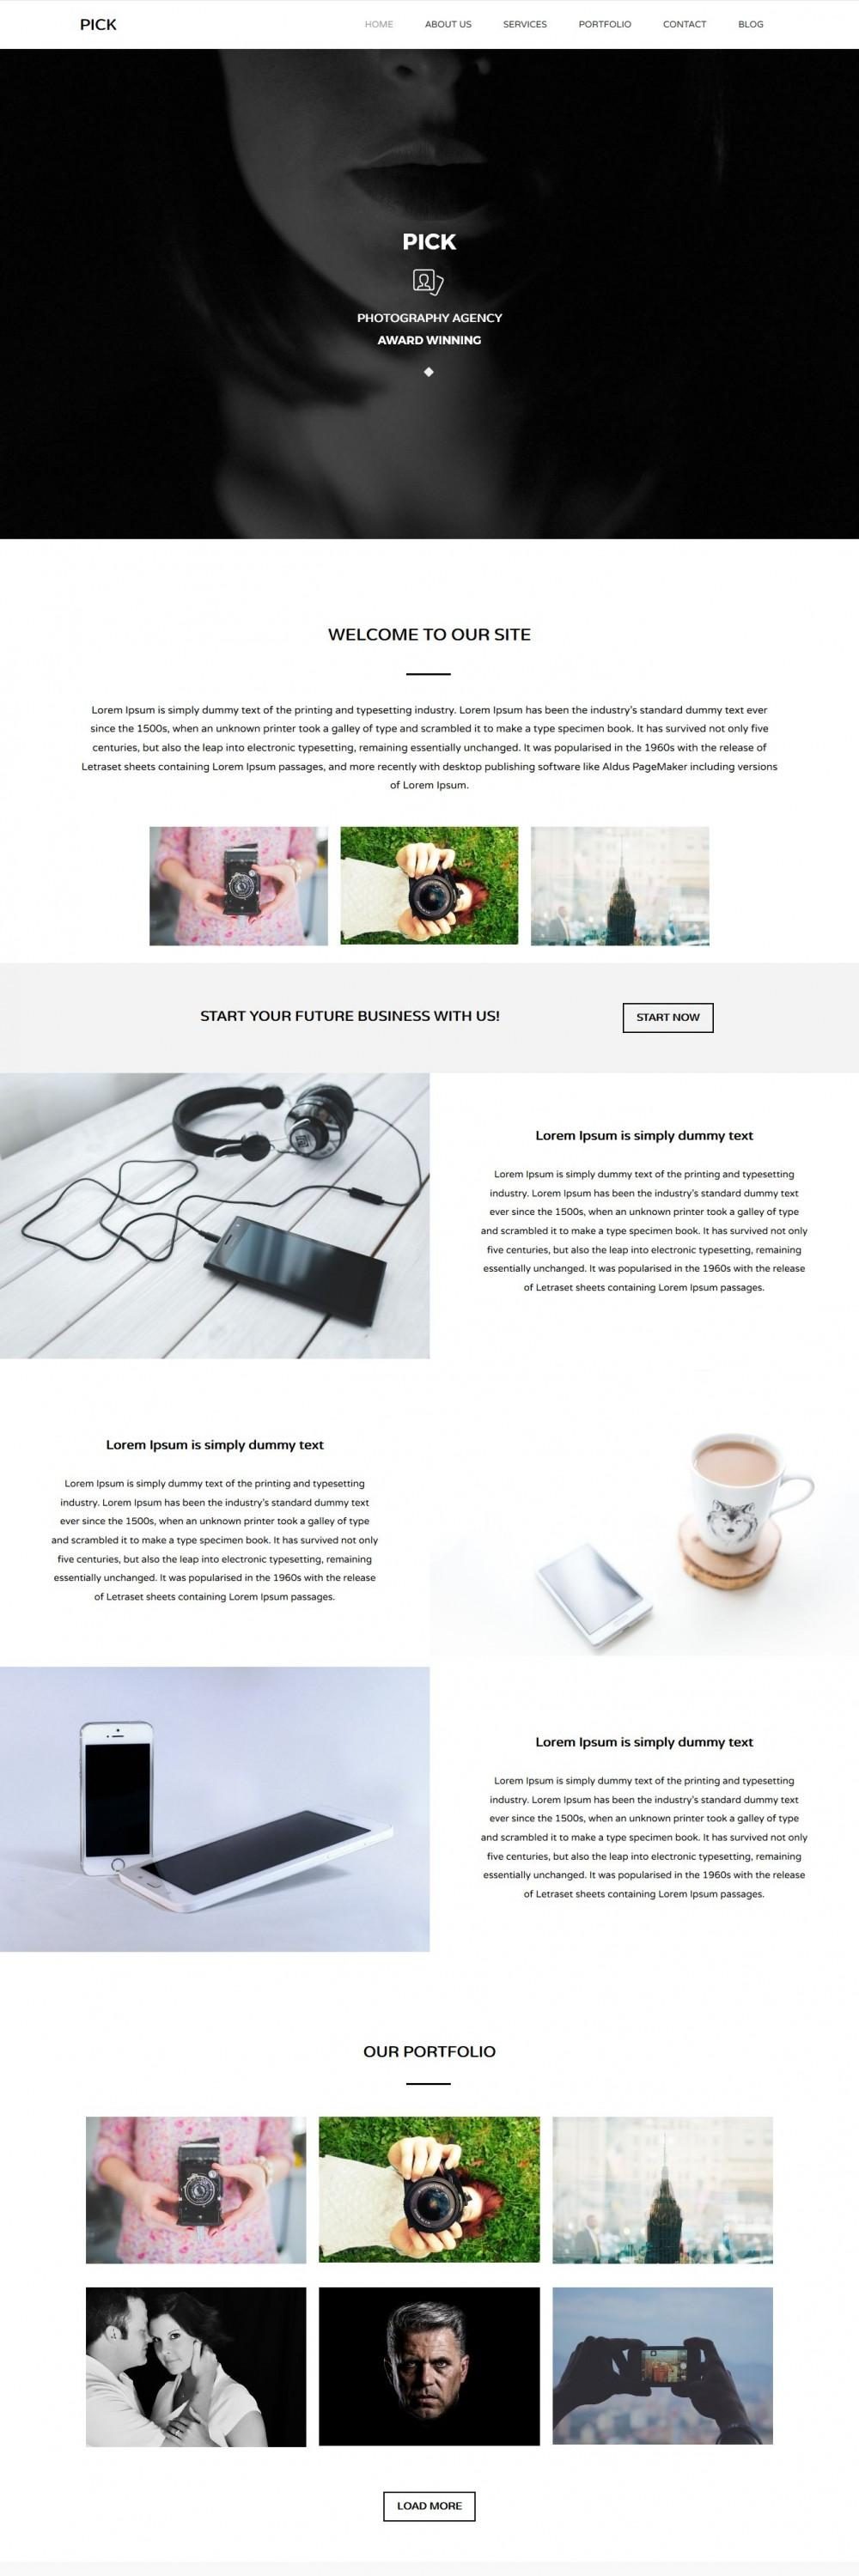 Pick - The Professional Photography Joomla Template